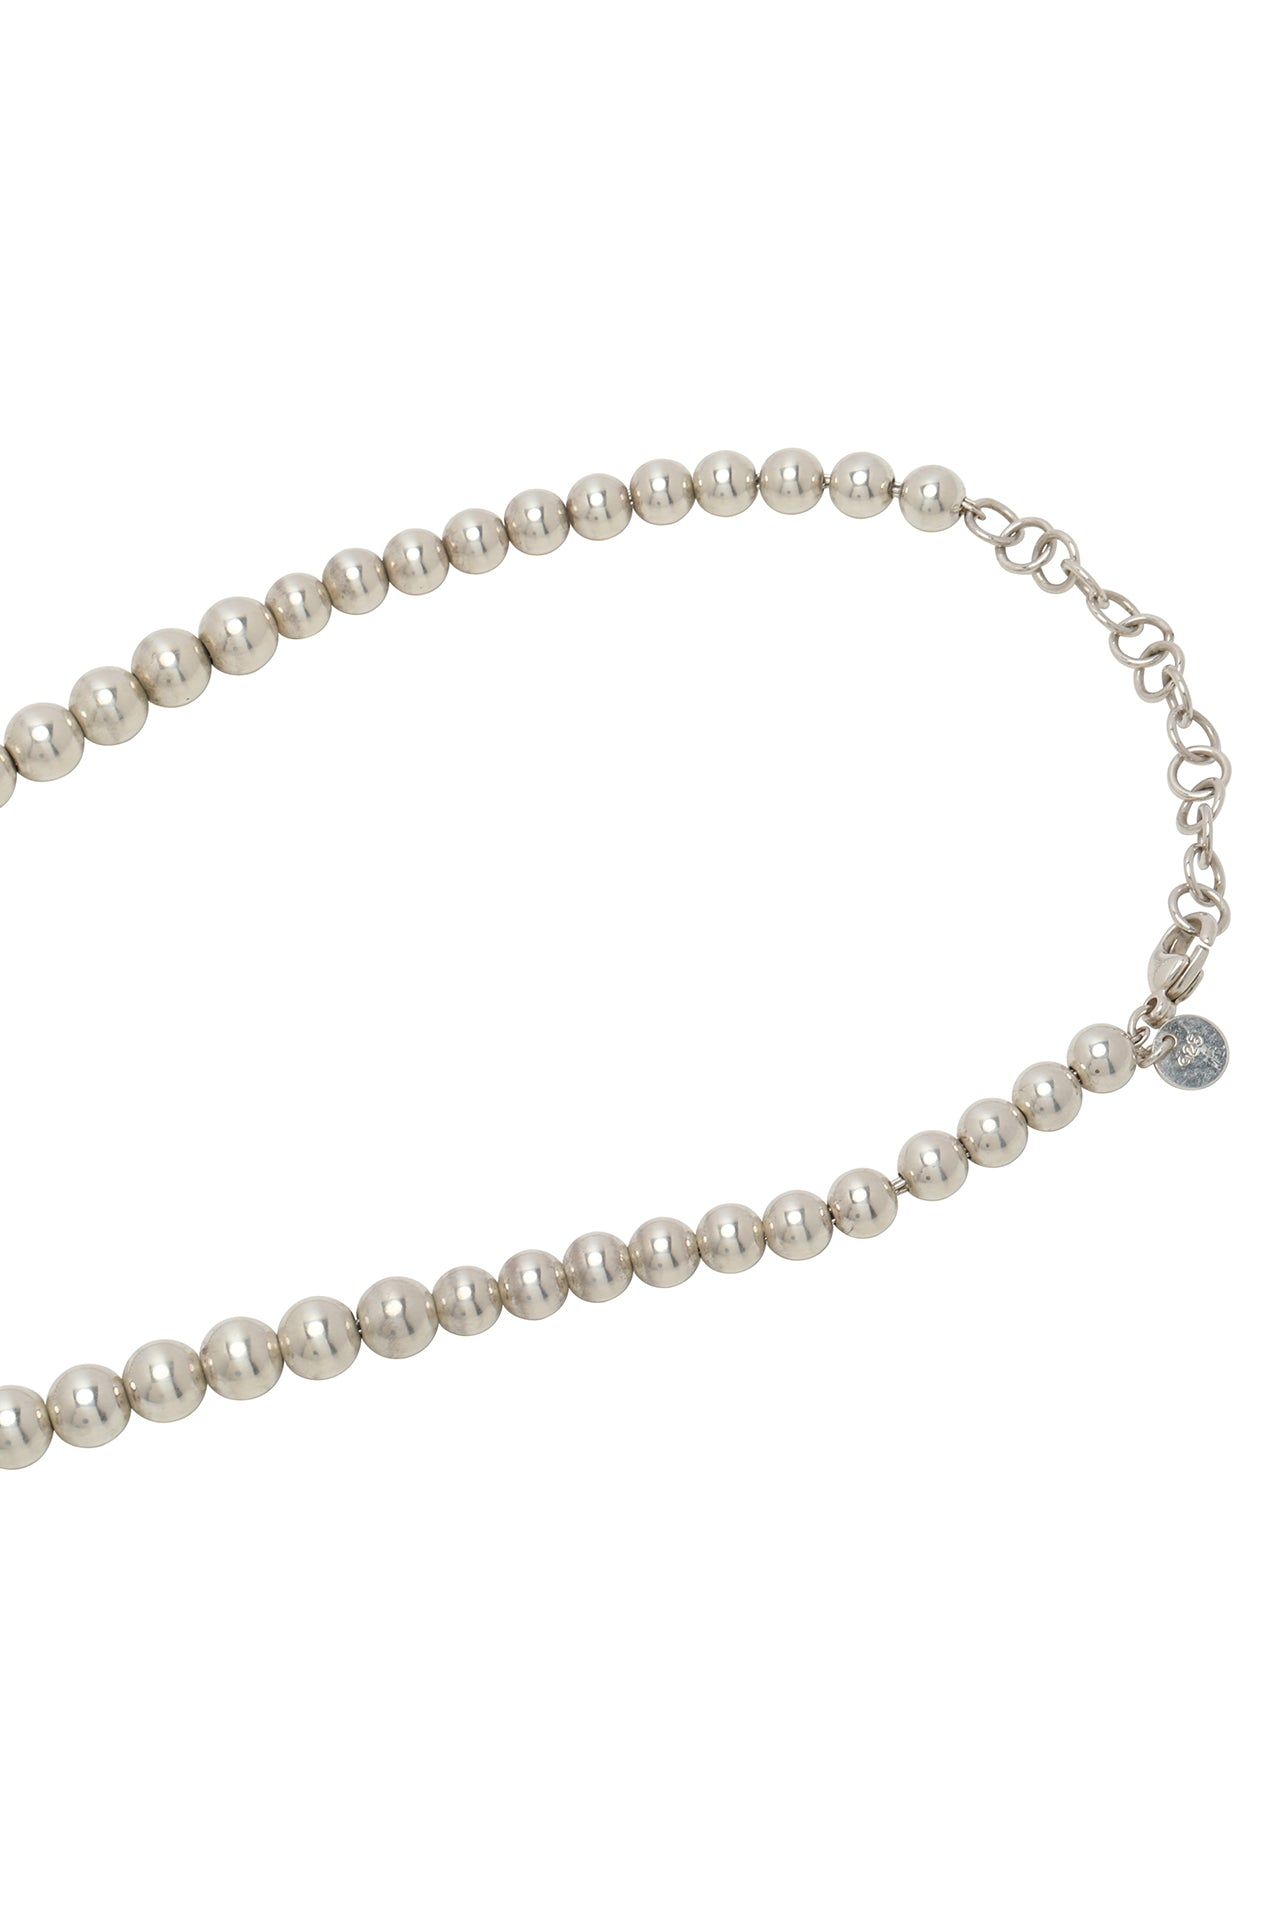 Tiffany Pearl Necklace